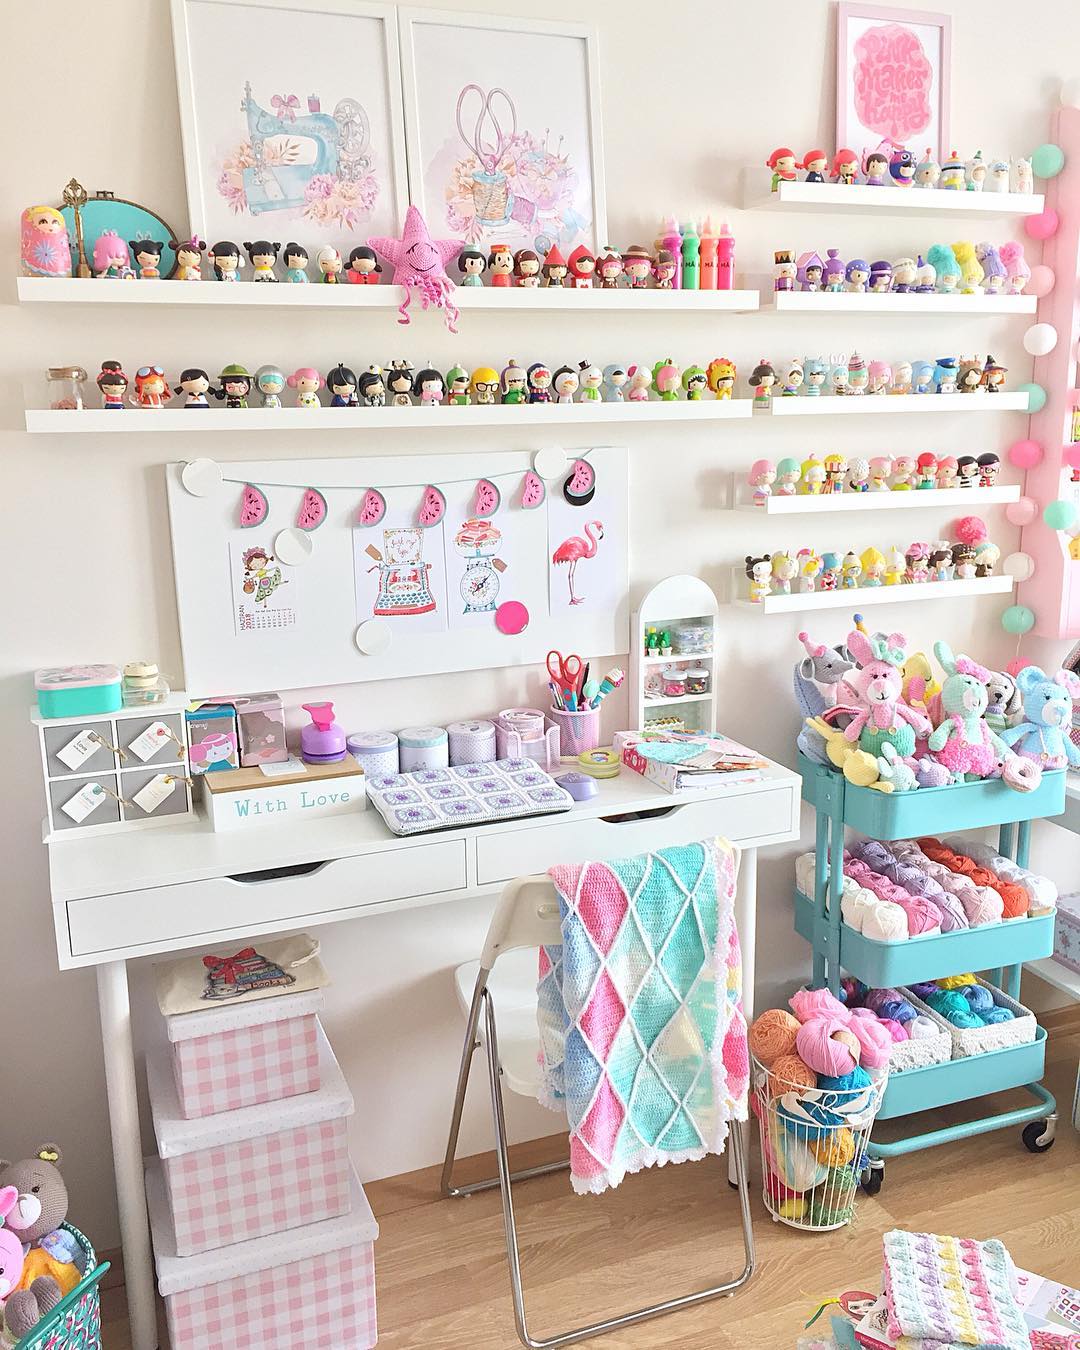 12 Drool Worthy Craft Room Ideas That Will Make You Drool - Craftsonfire